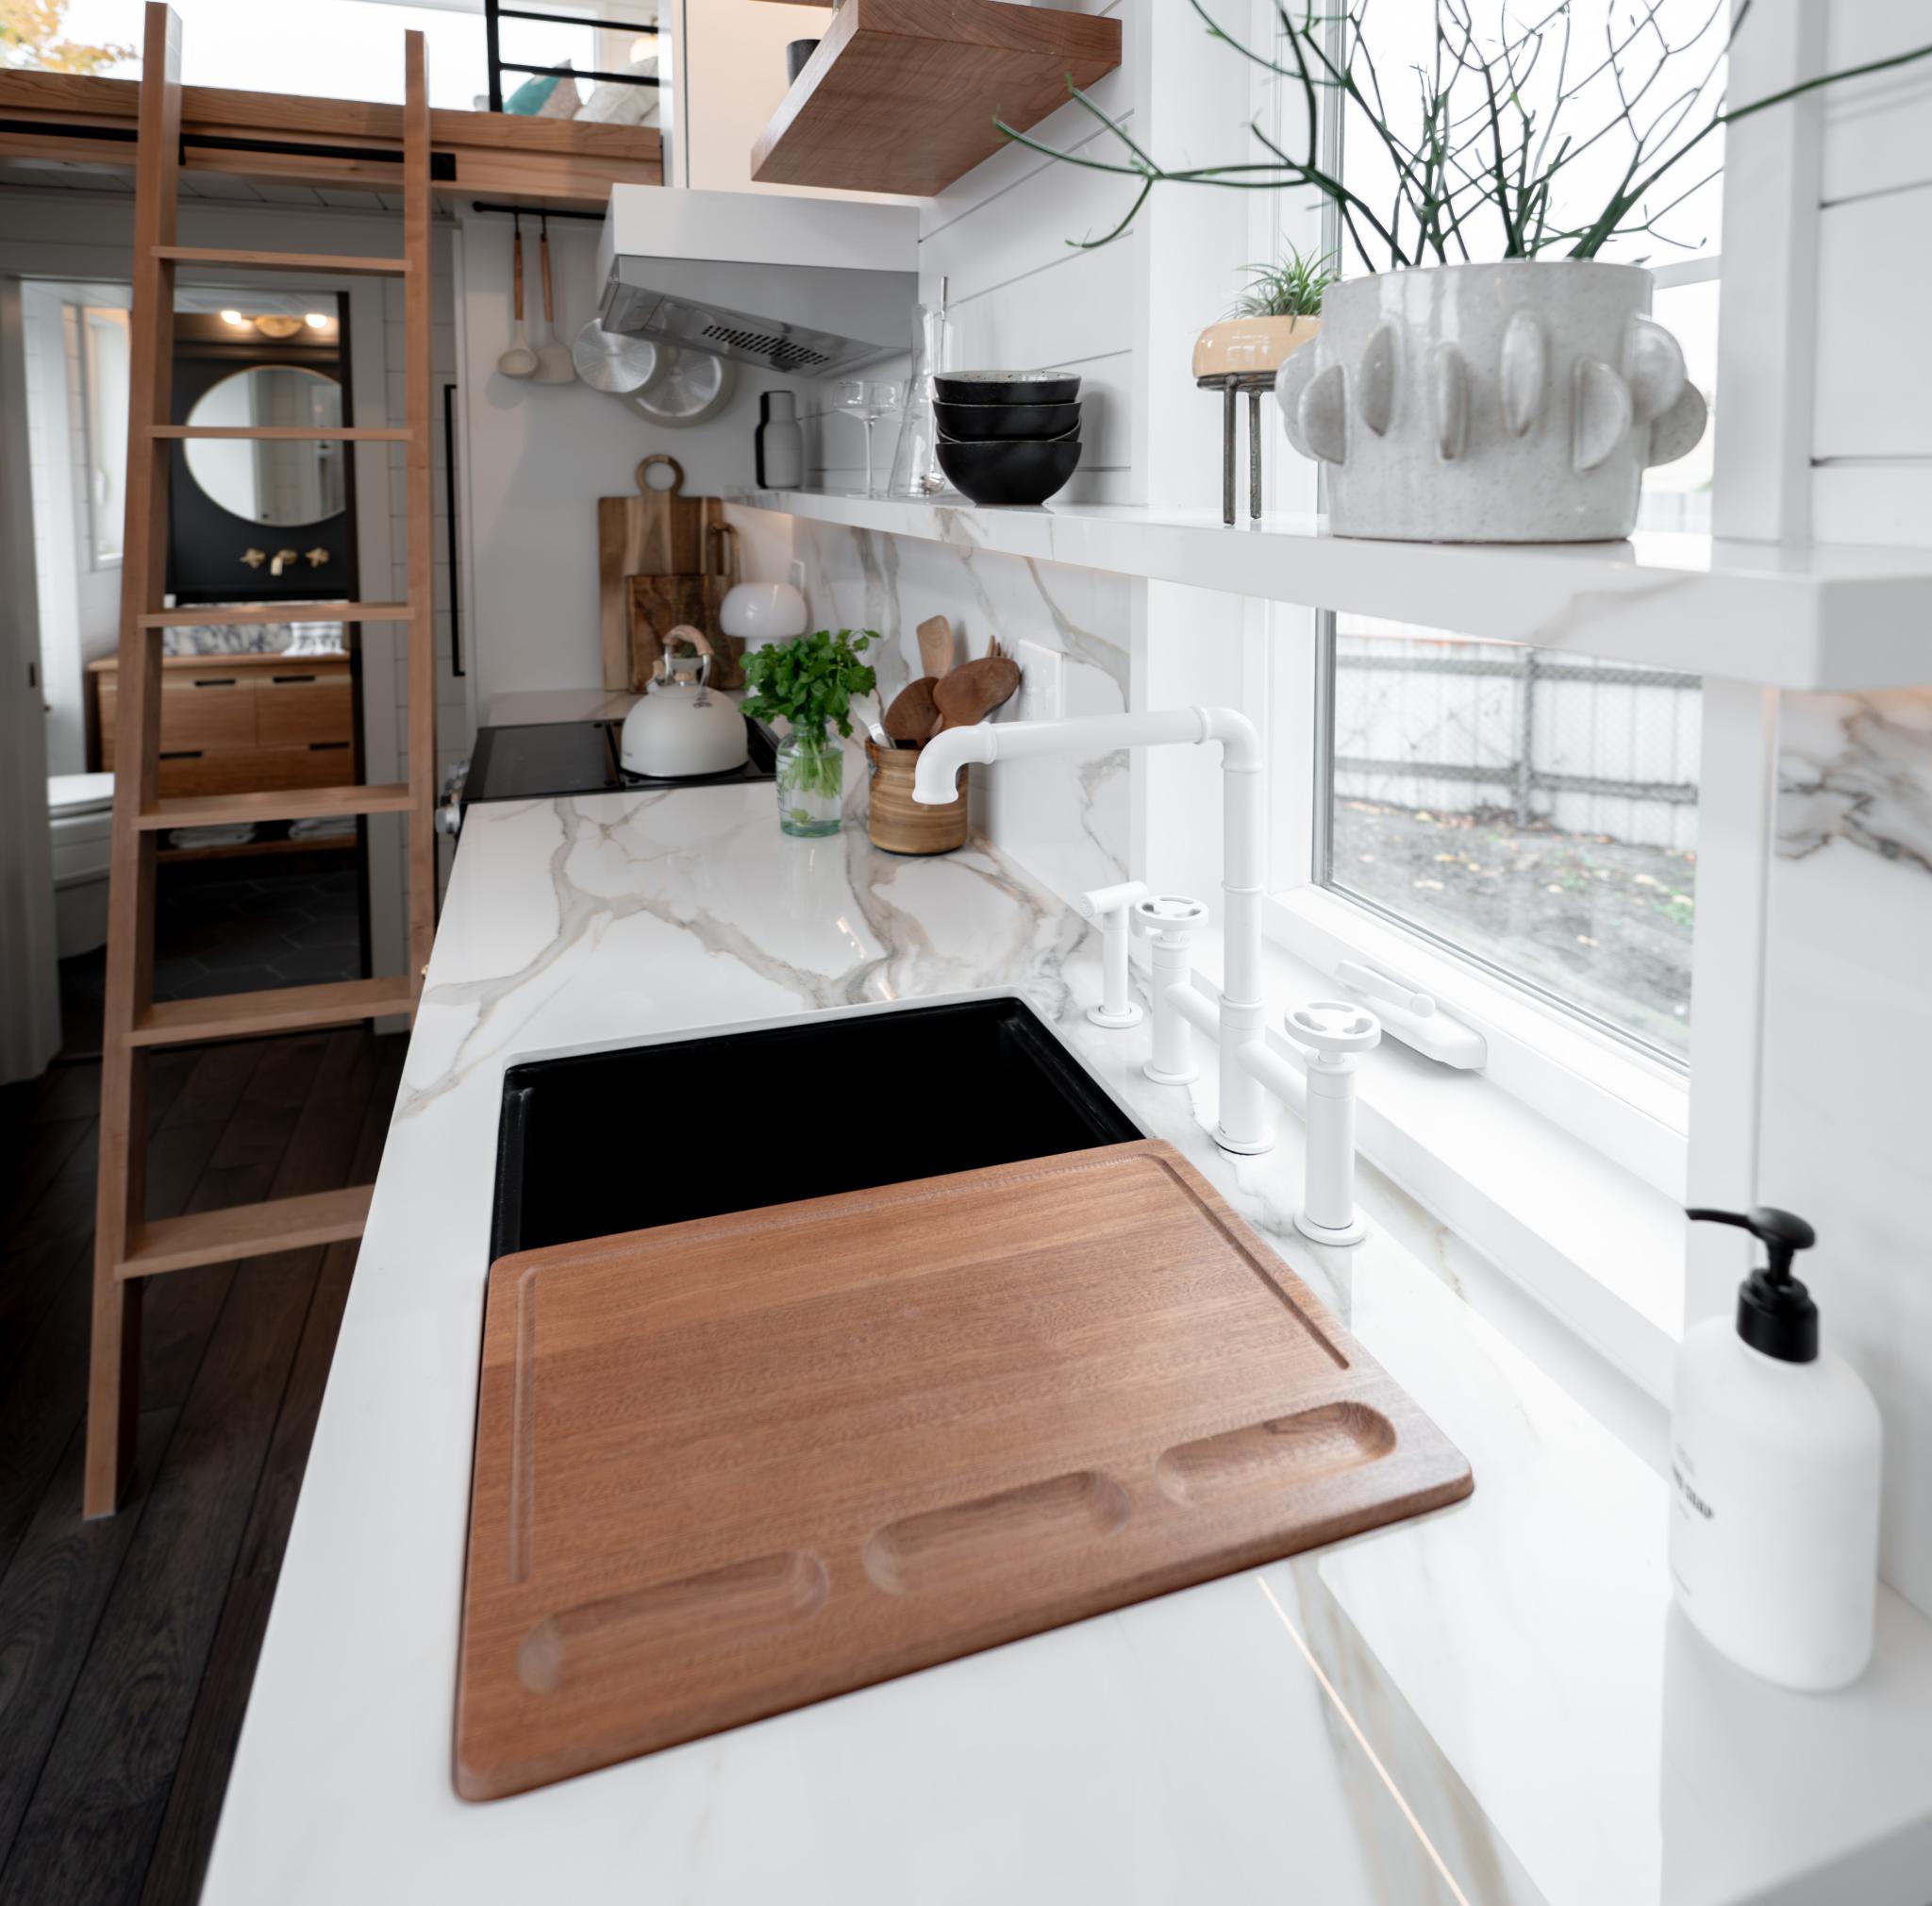 Sink with Cutting Board - Terra Haven by Tru Form Tiny